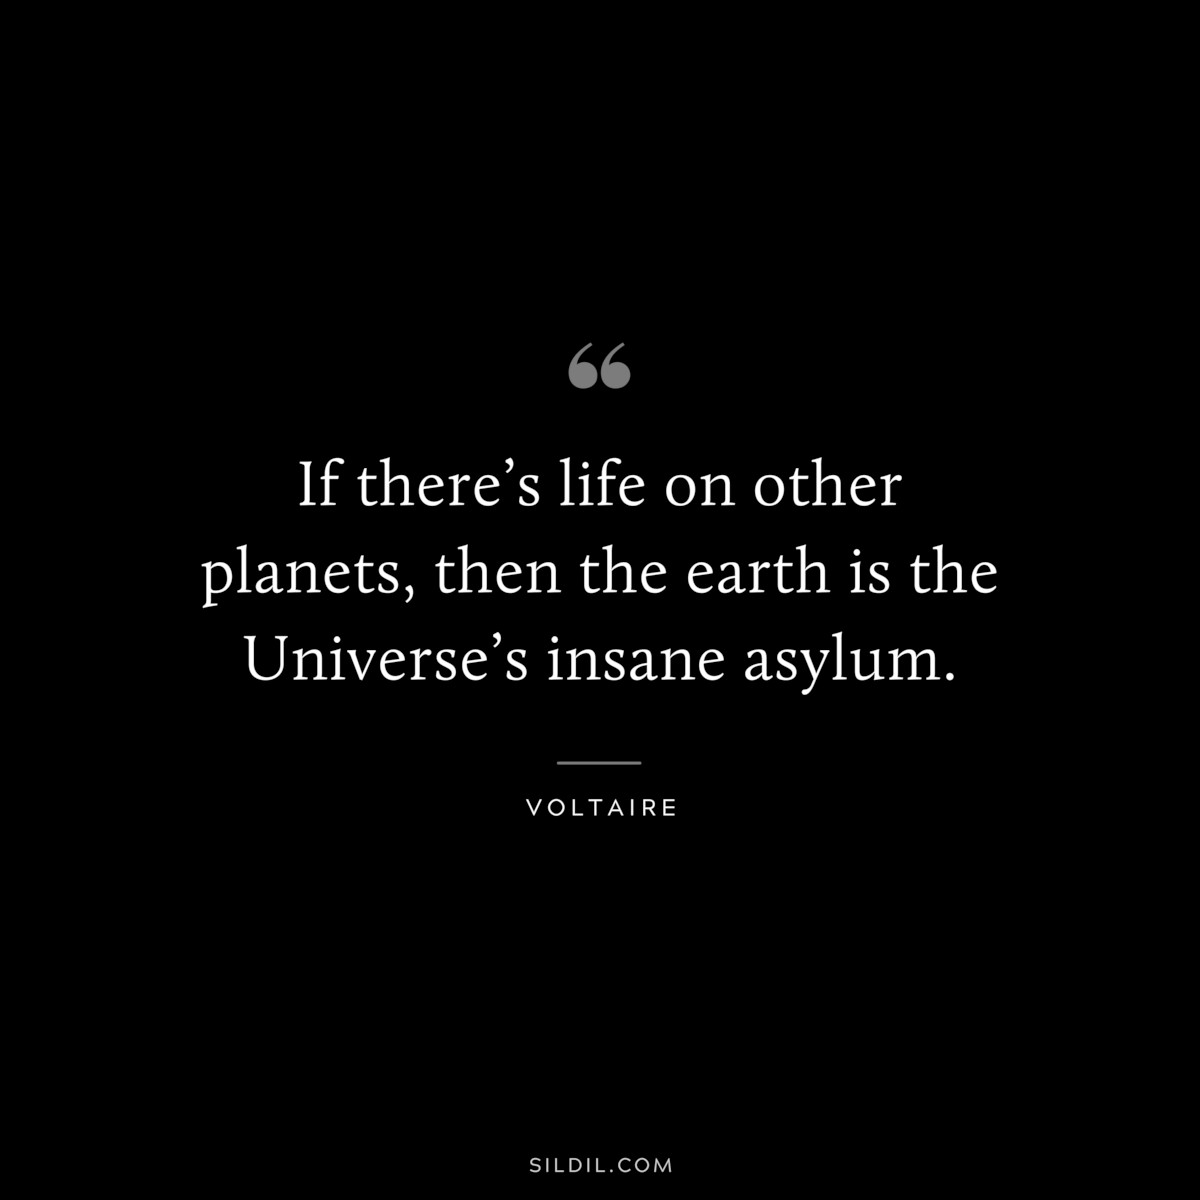 If there’s life on other planets, then the earth is the Universe’s insane asylum. ― Voltaire